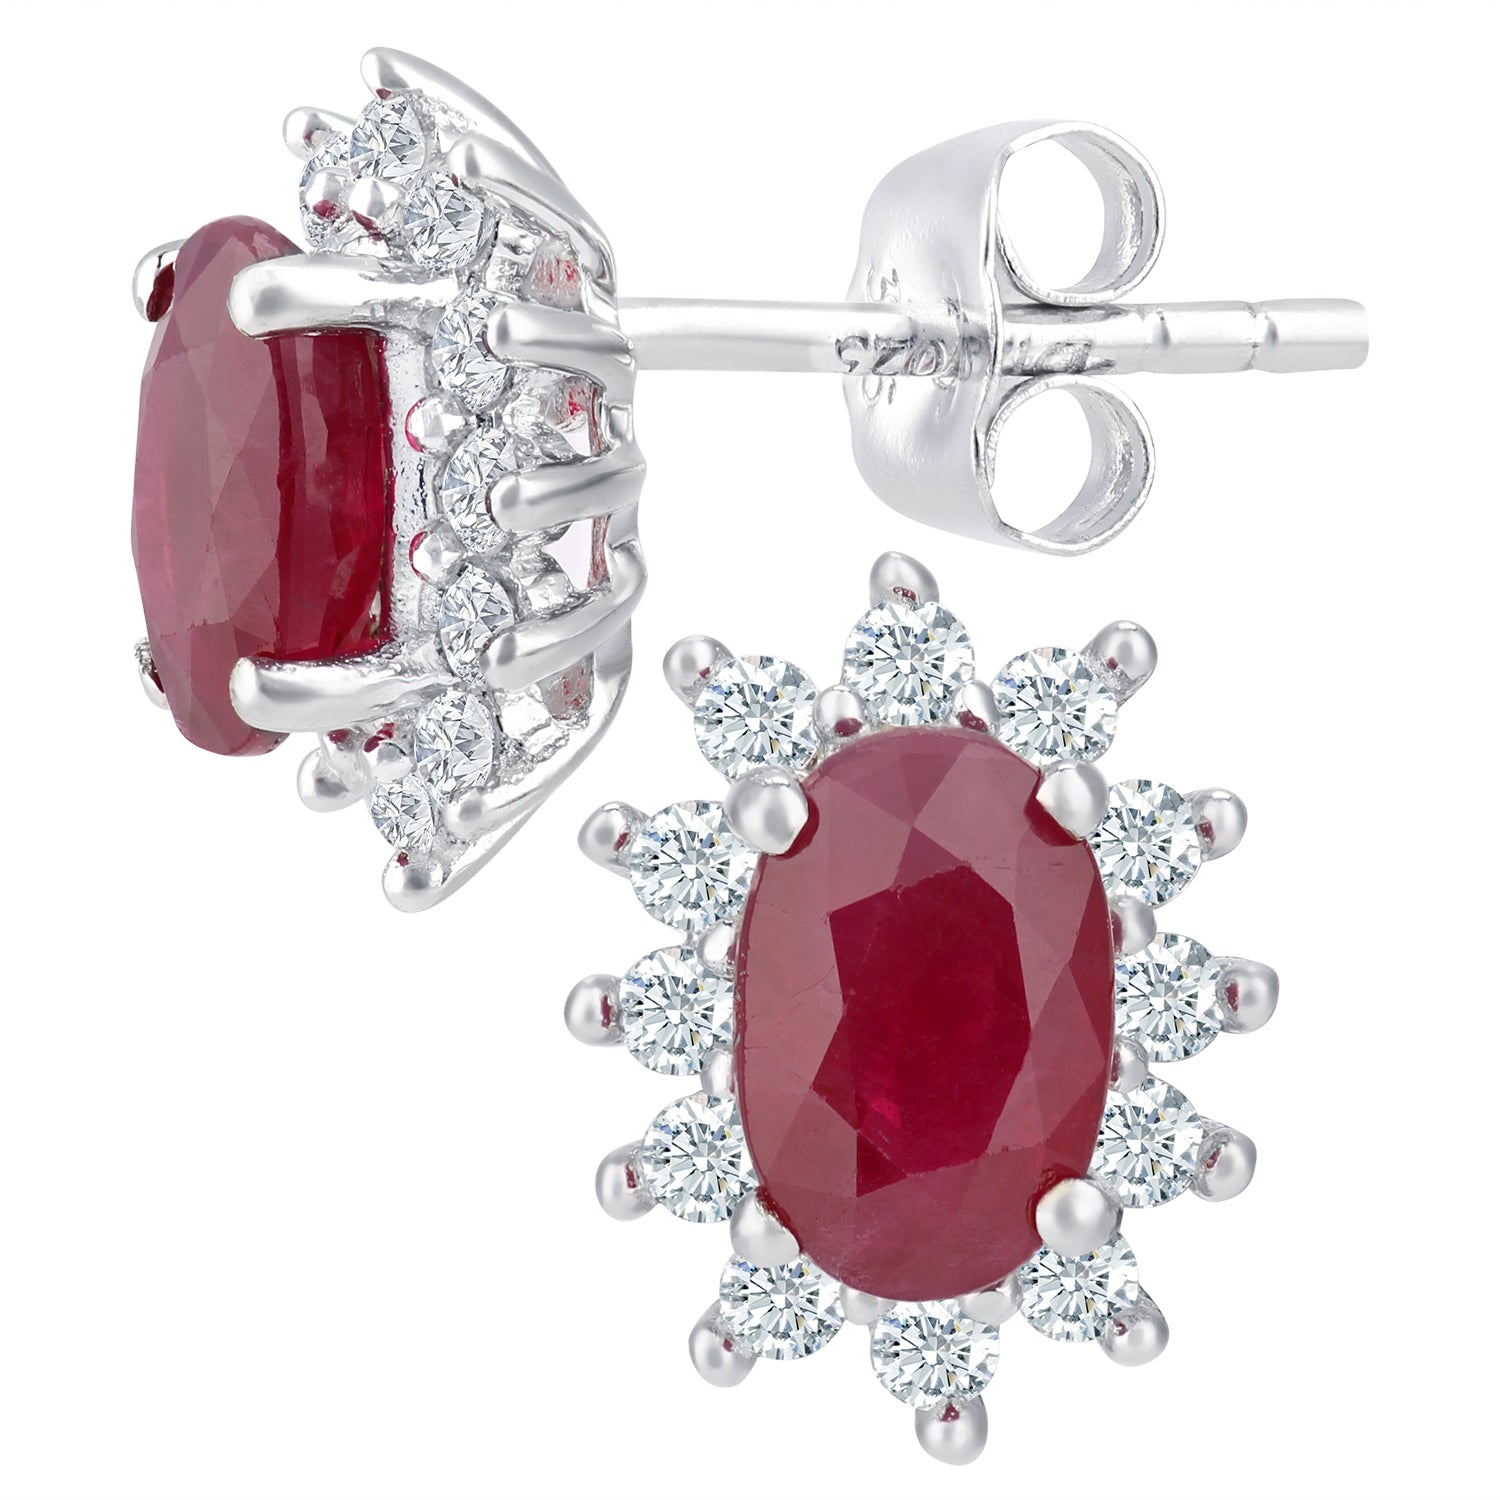 Simplicity White Gold Oval Shaped Ruby and Diamond Cluster Stud